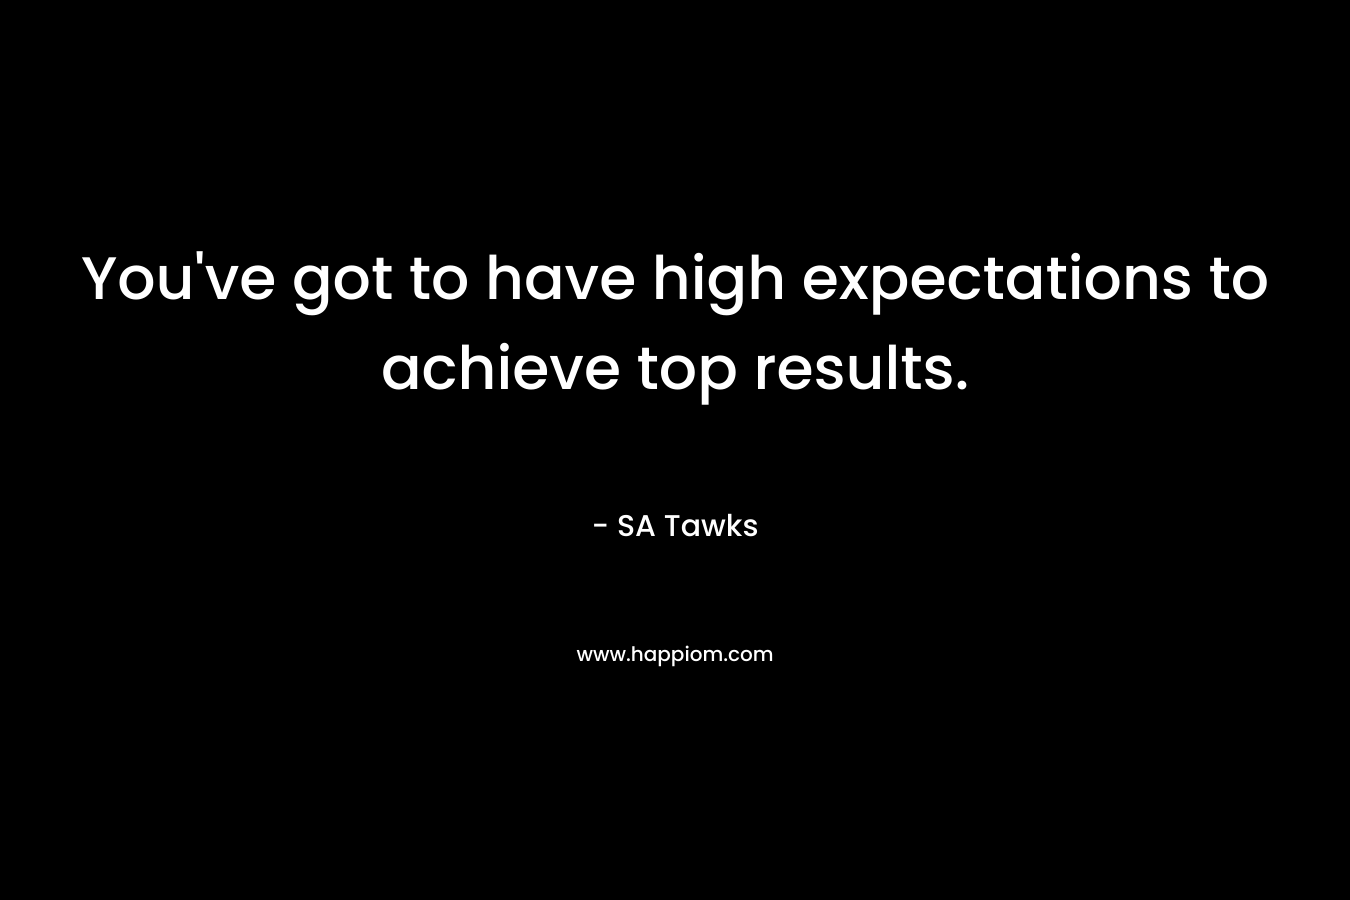 You've got to have high expectations to achieve top results.